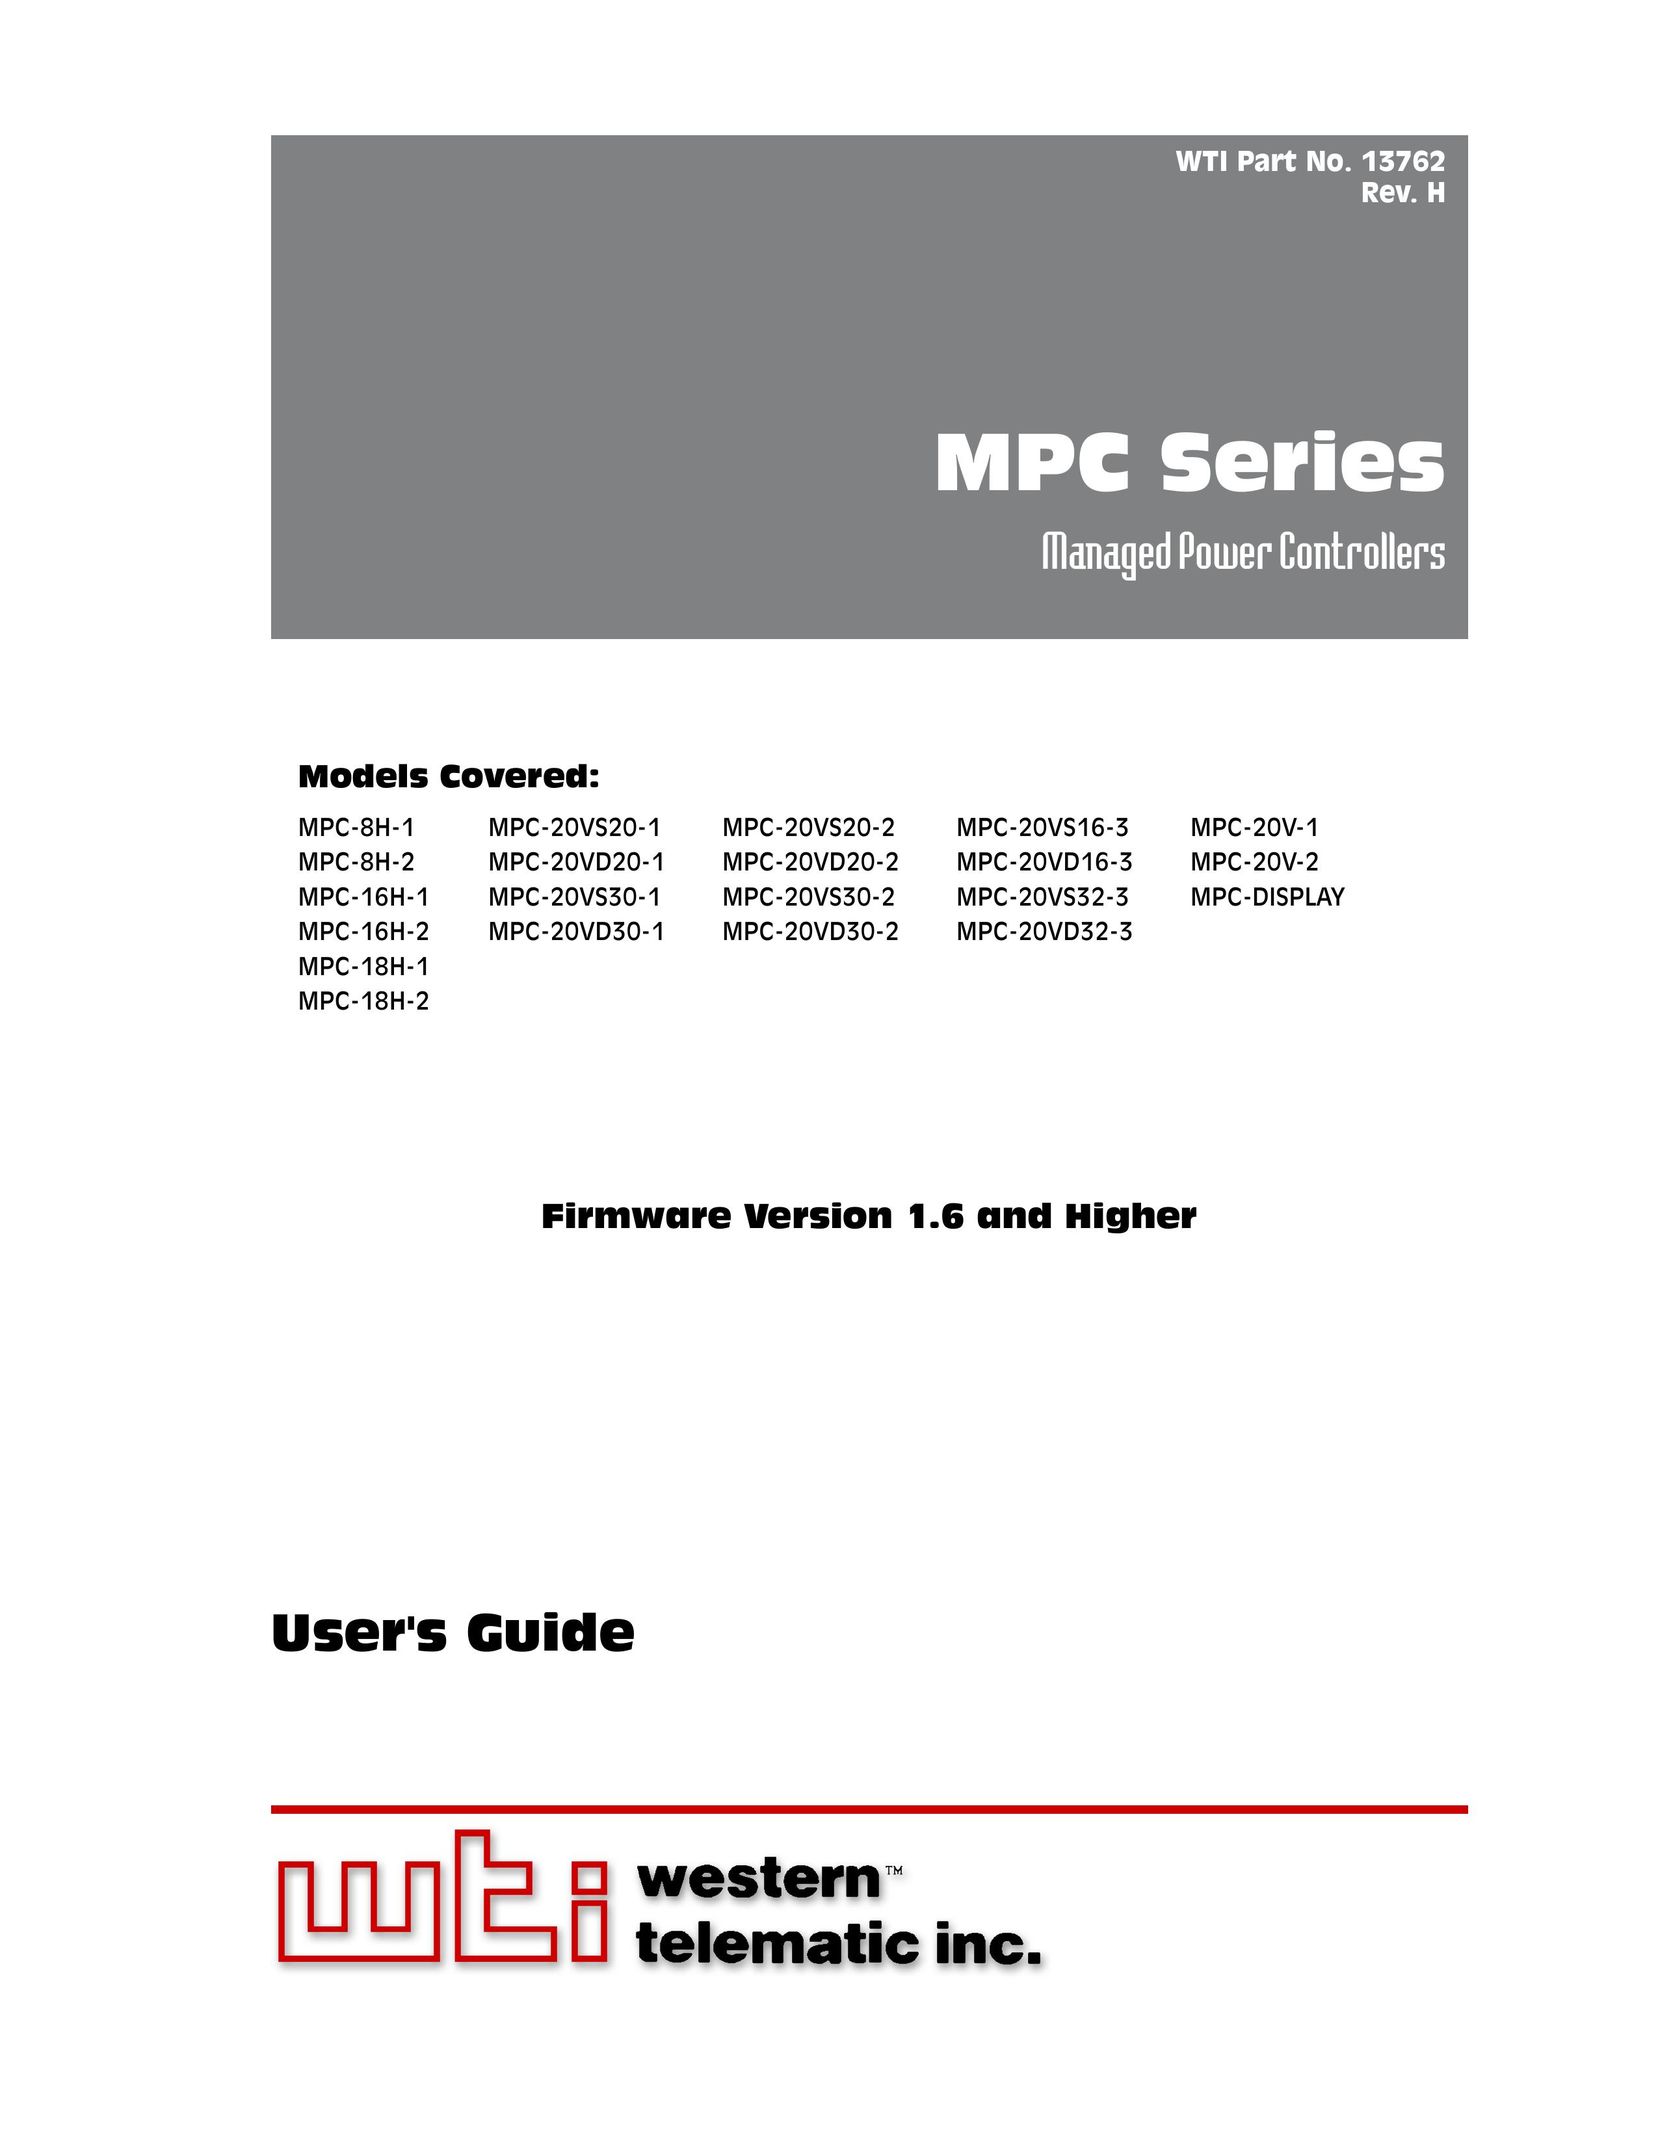 Western Telematic MPC-20VD32-3 Network Card User Manual